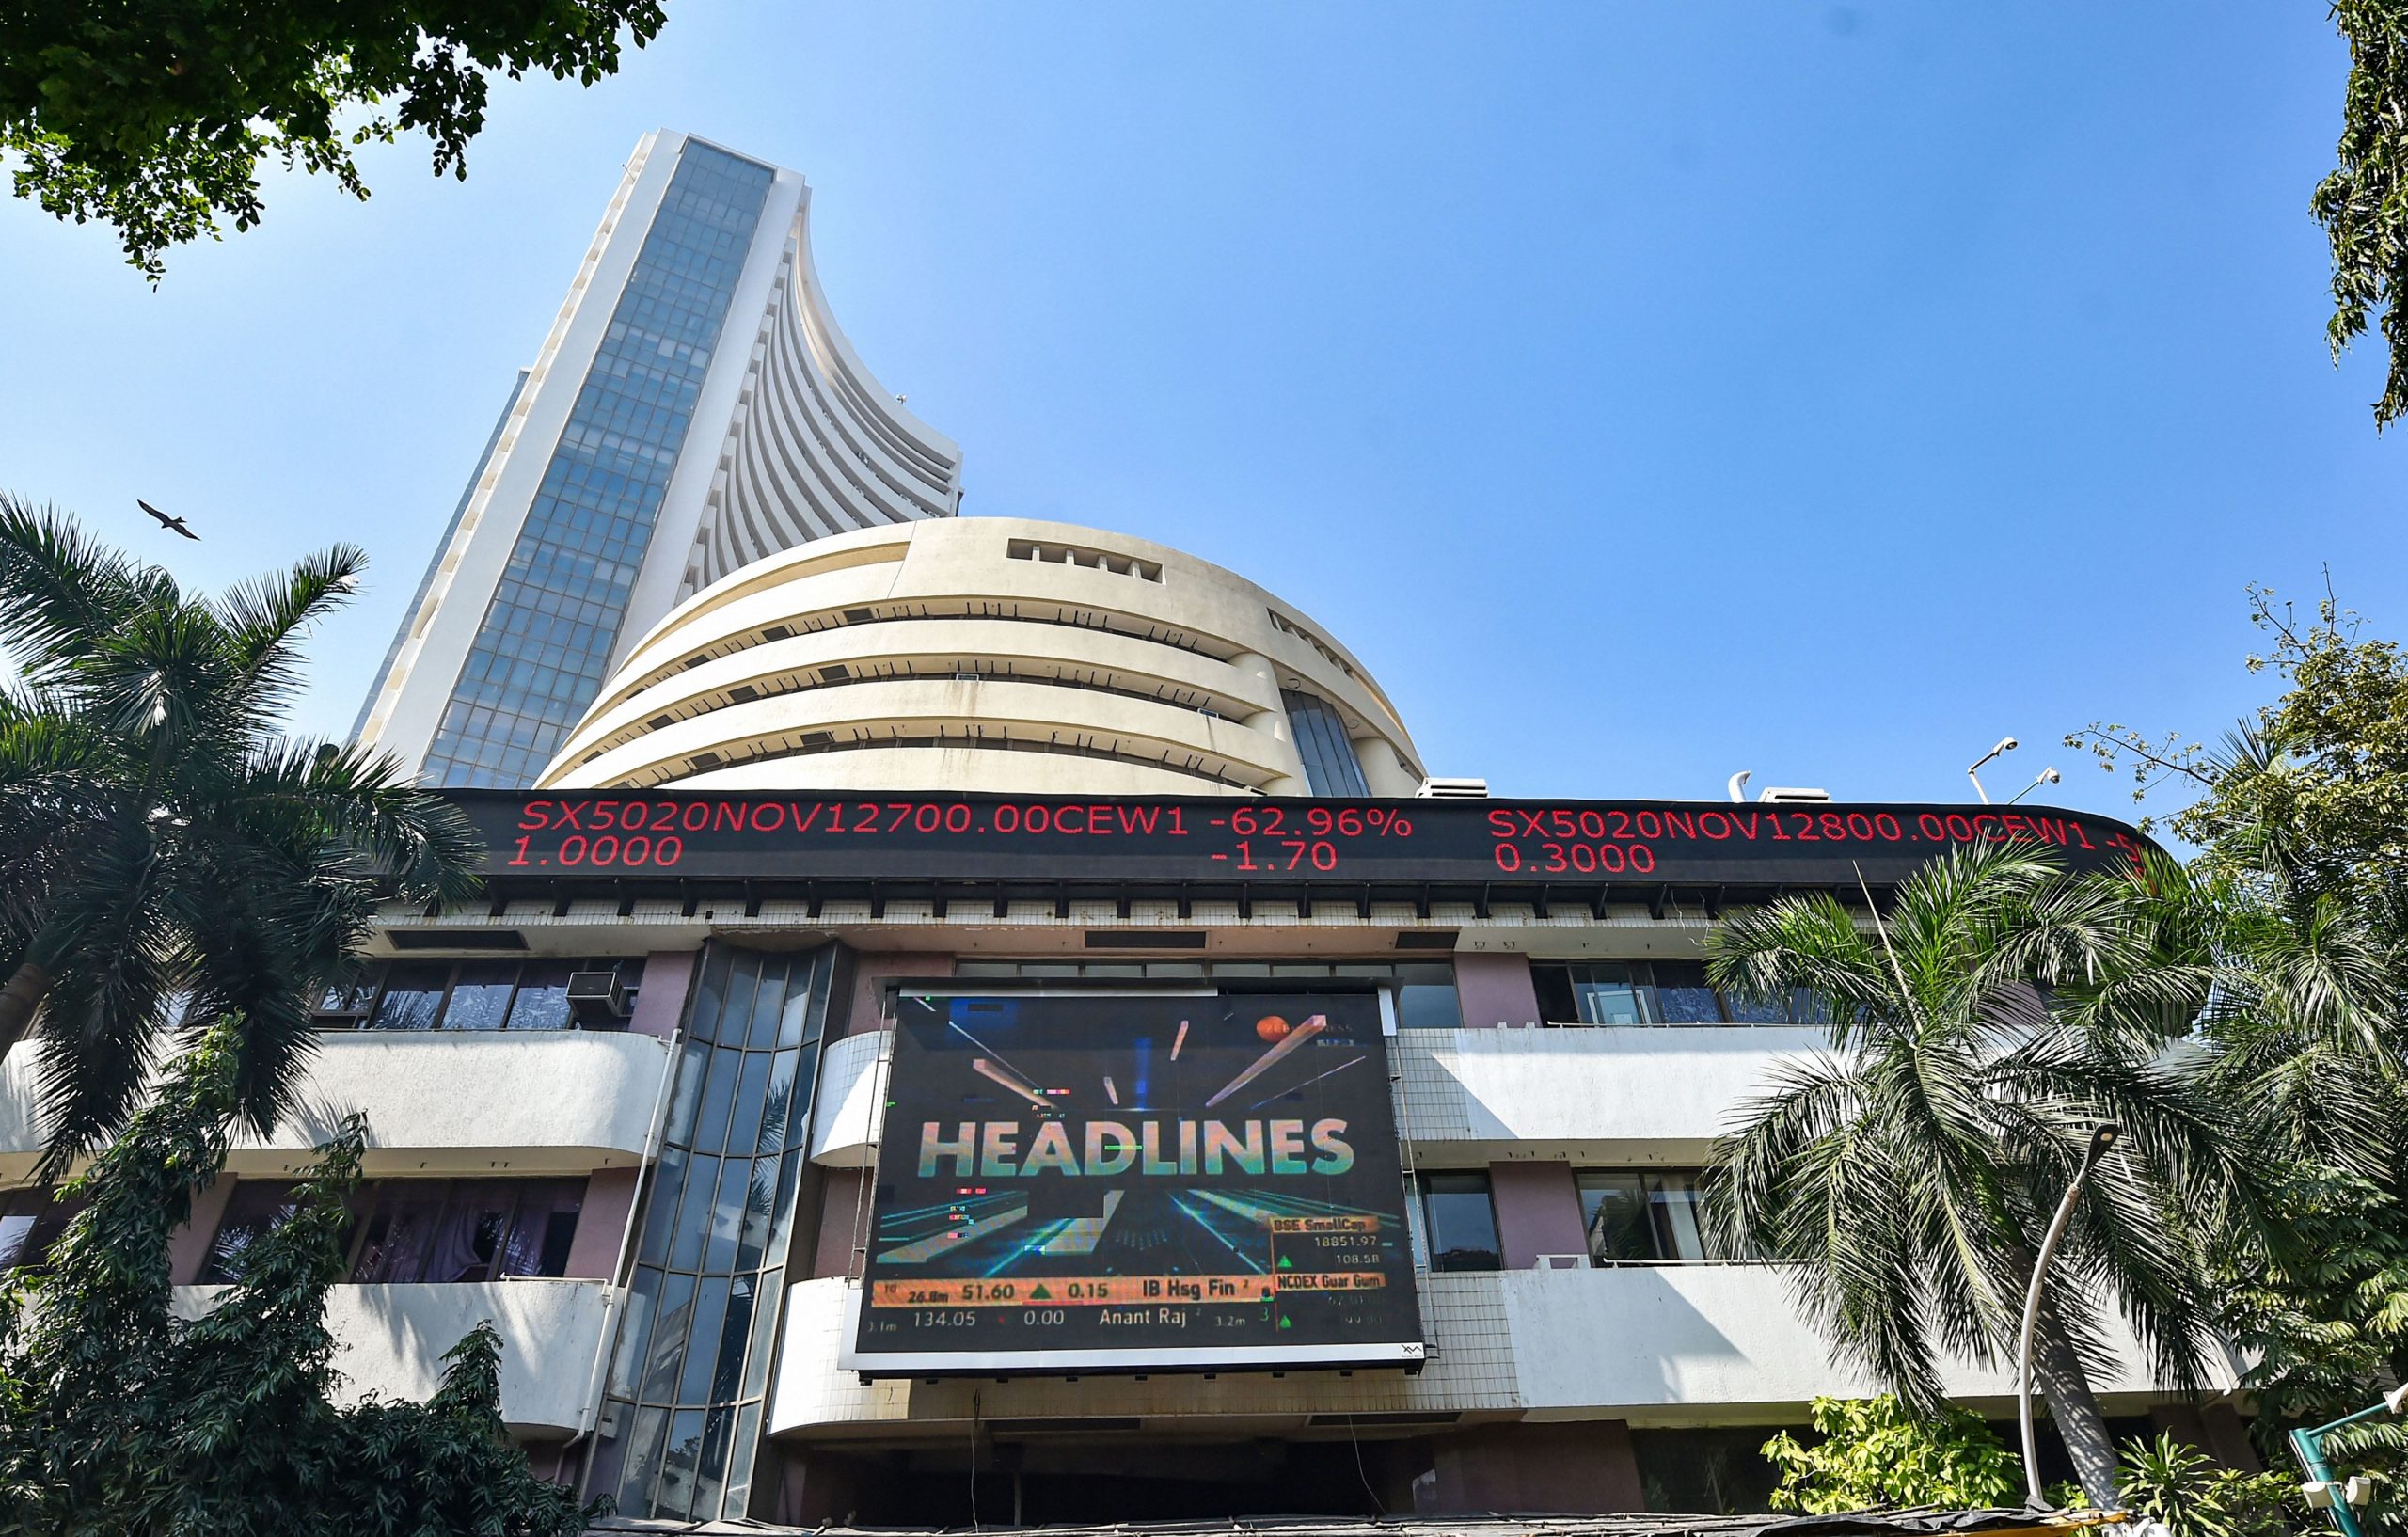 Trending Stocks: Zomato, Eveready, ITC, Pfizer and others in news today